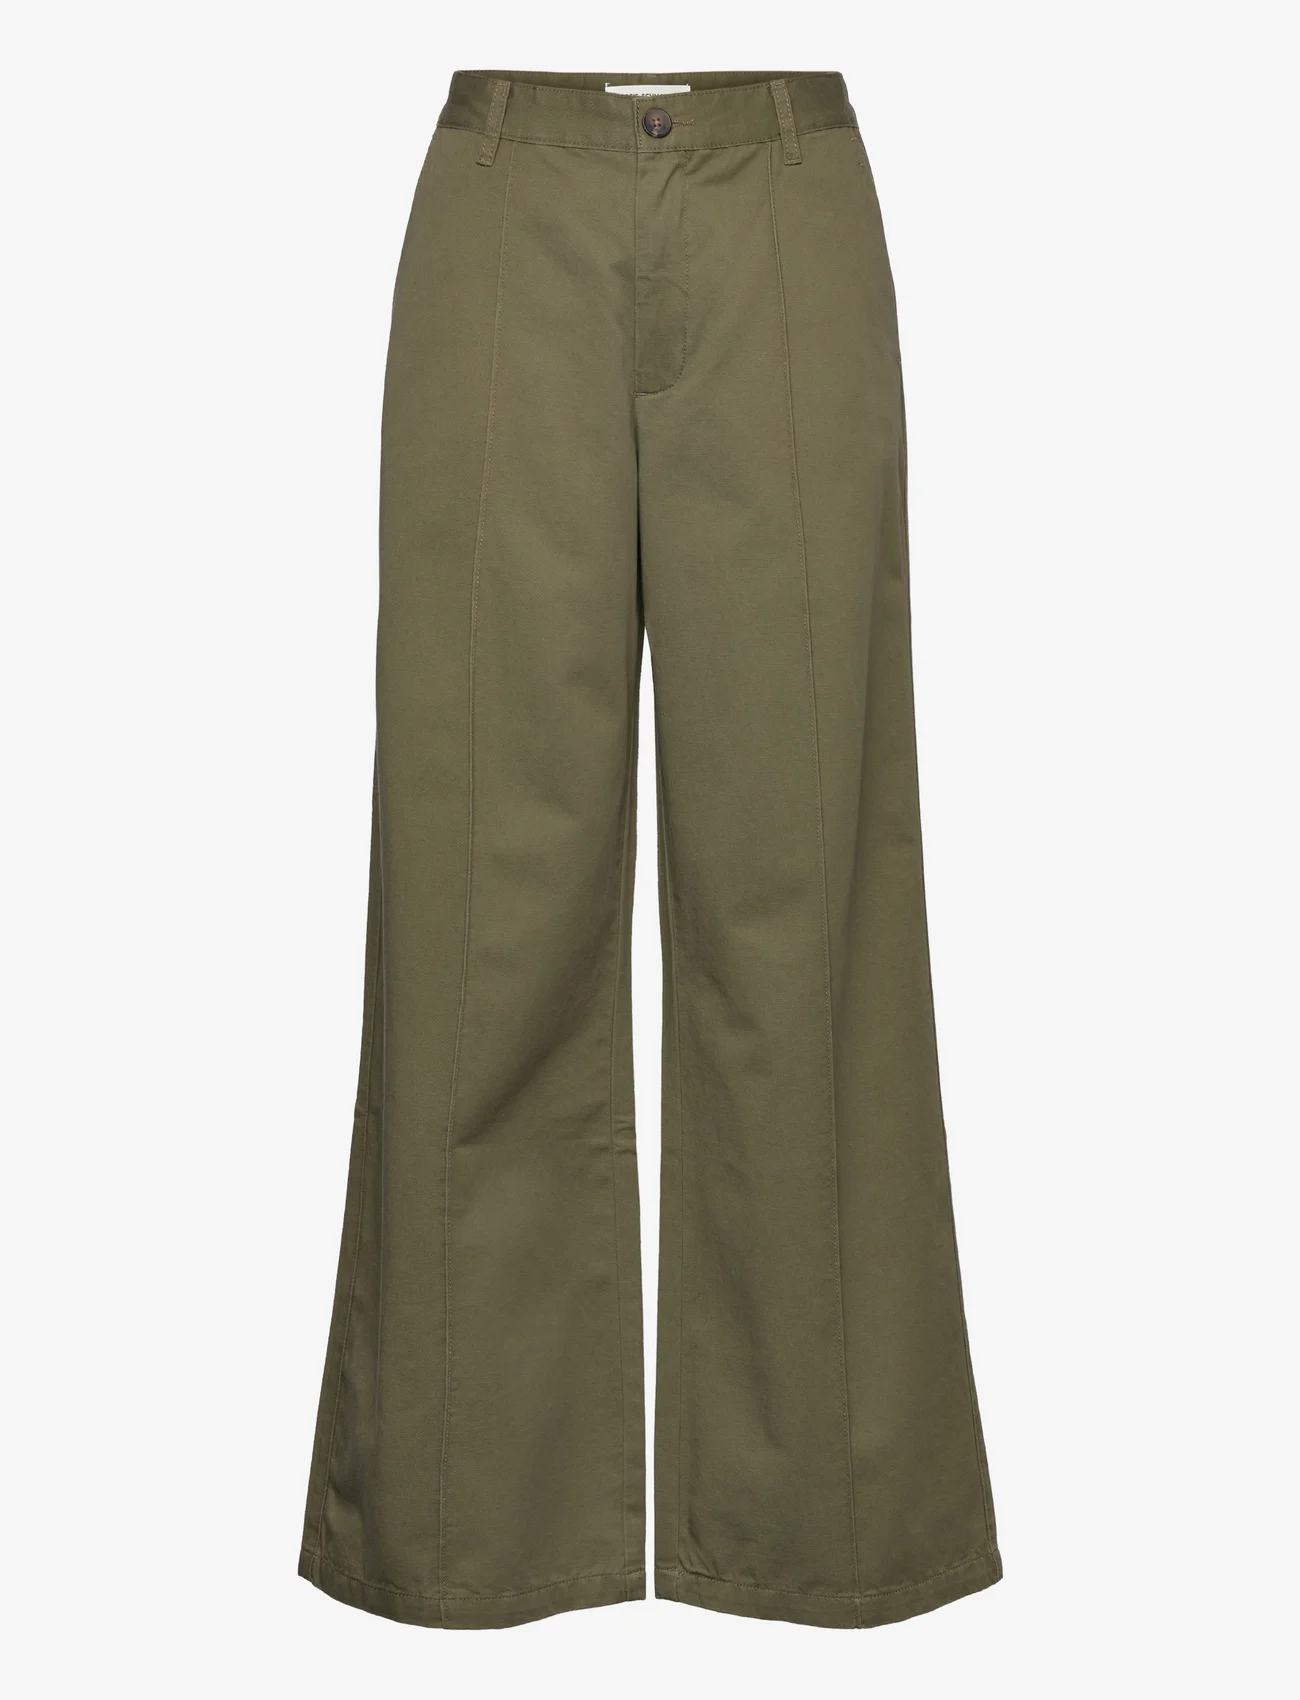 Sofie Schnoor - Trousers - chinos - army green - 0